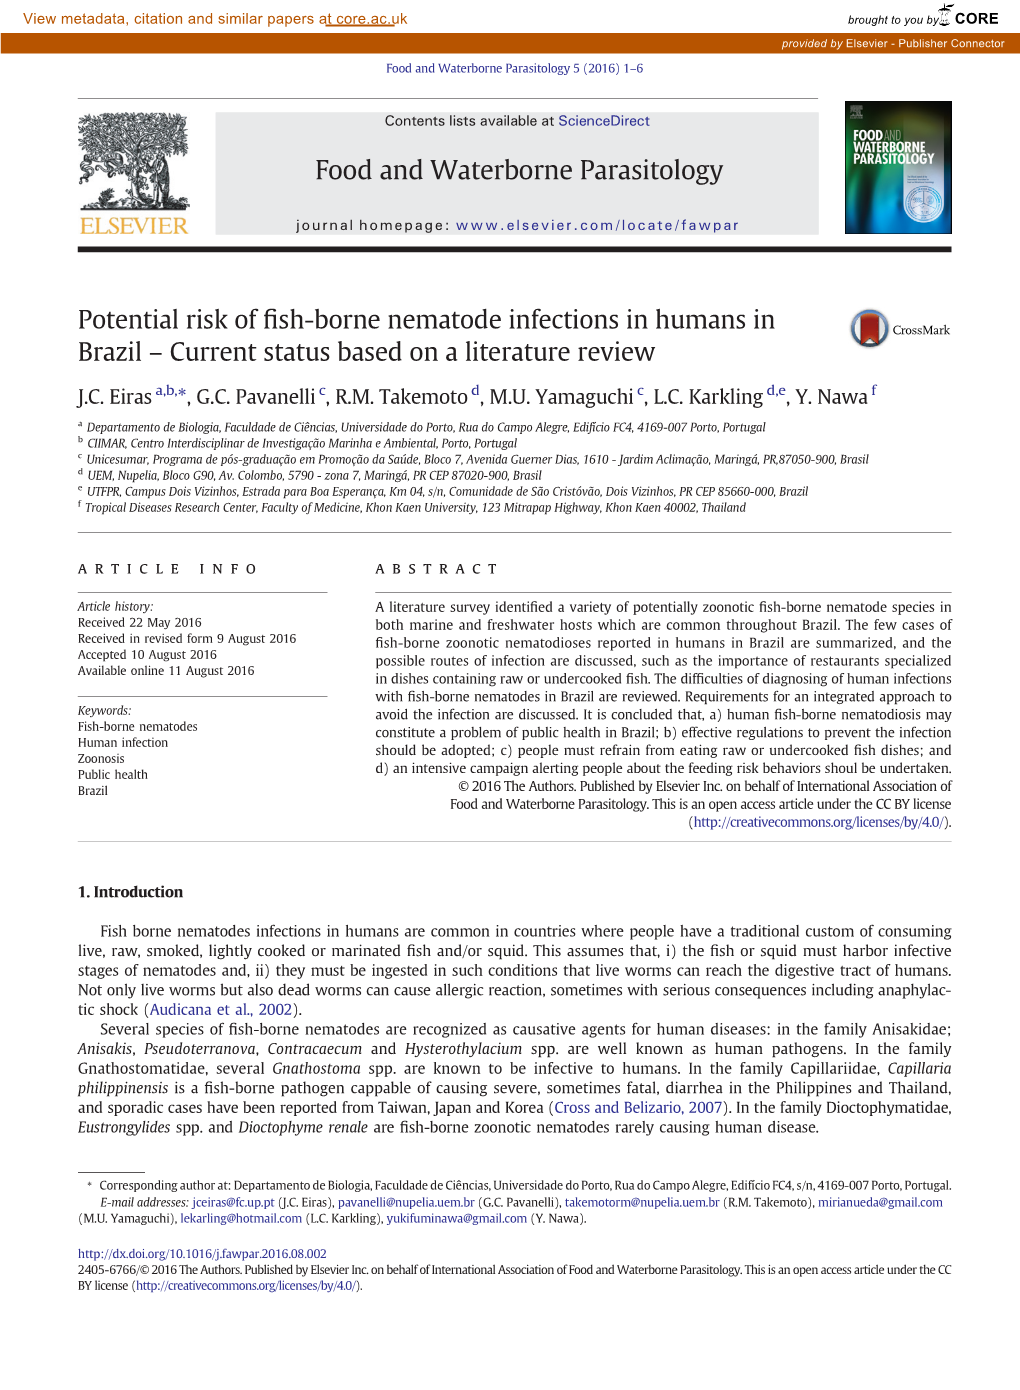 Potential Risk of Fish-Borne Nematode Infections in Humans in Brazil